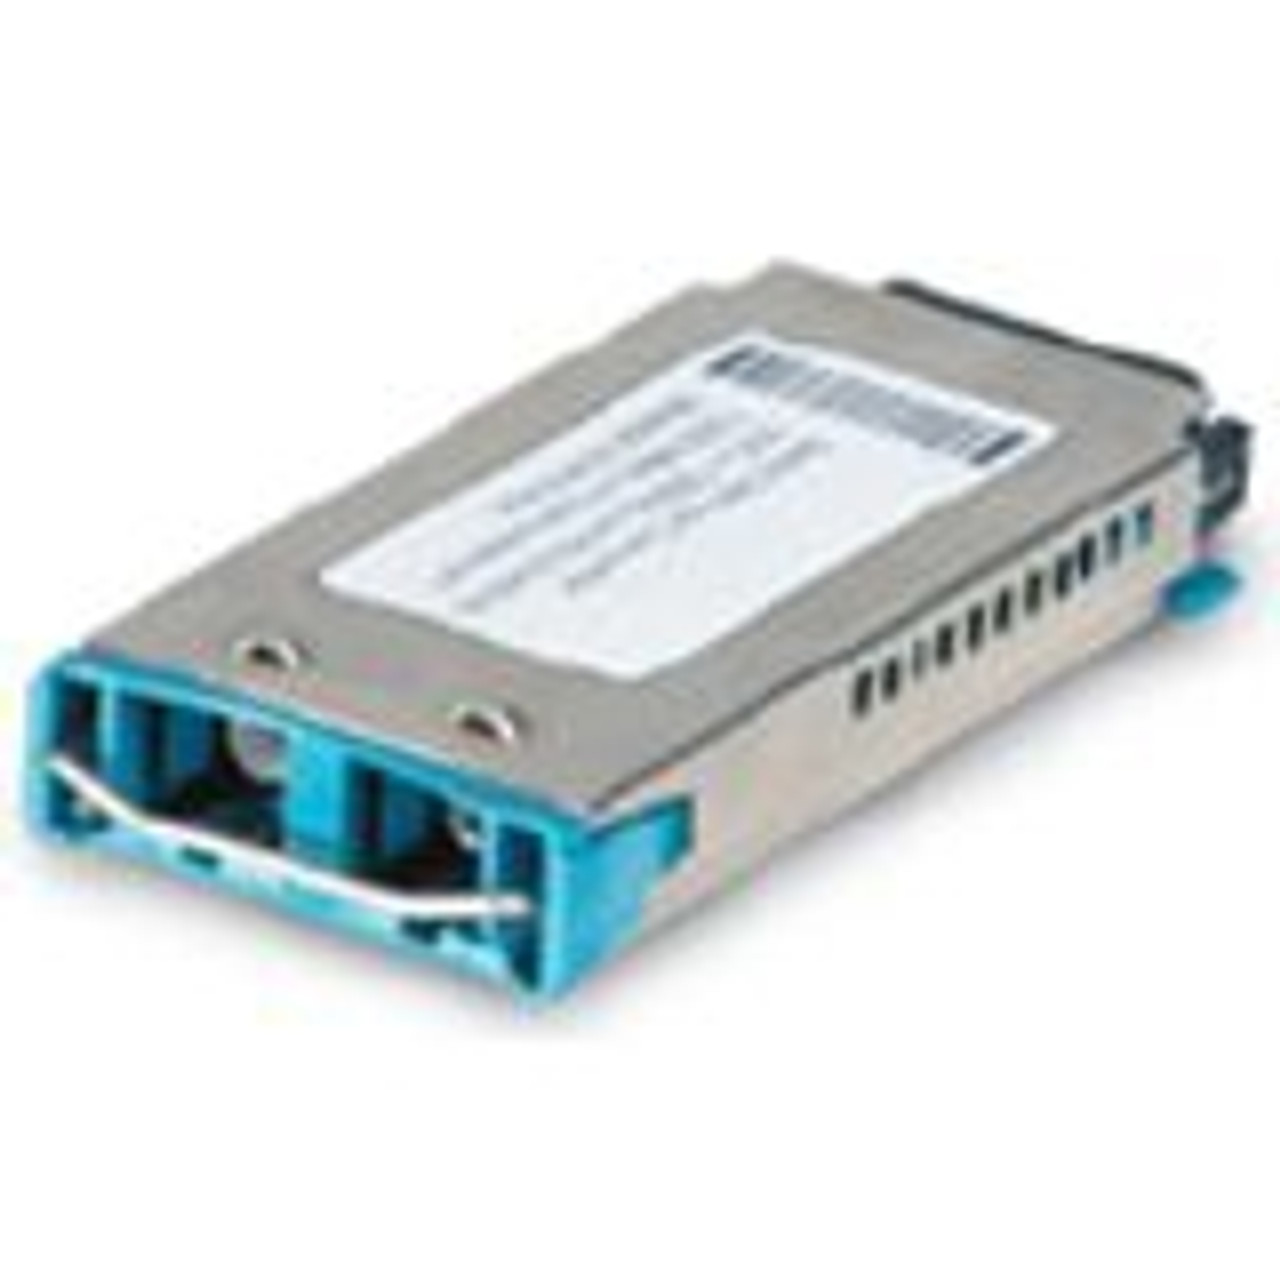 990-01999-06 Allied Telesis AT-G8ZX70 1.25Gbps 1000Base-ZX Single-mode Fiber 70km 1490nm SC Connector GBIC Transceiver Module